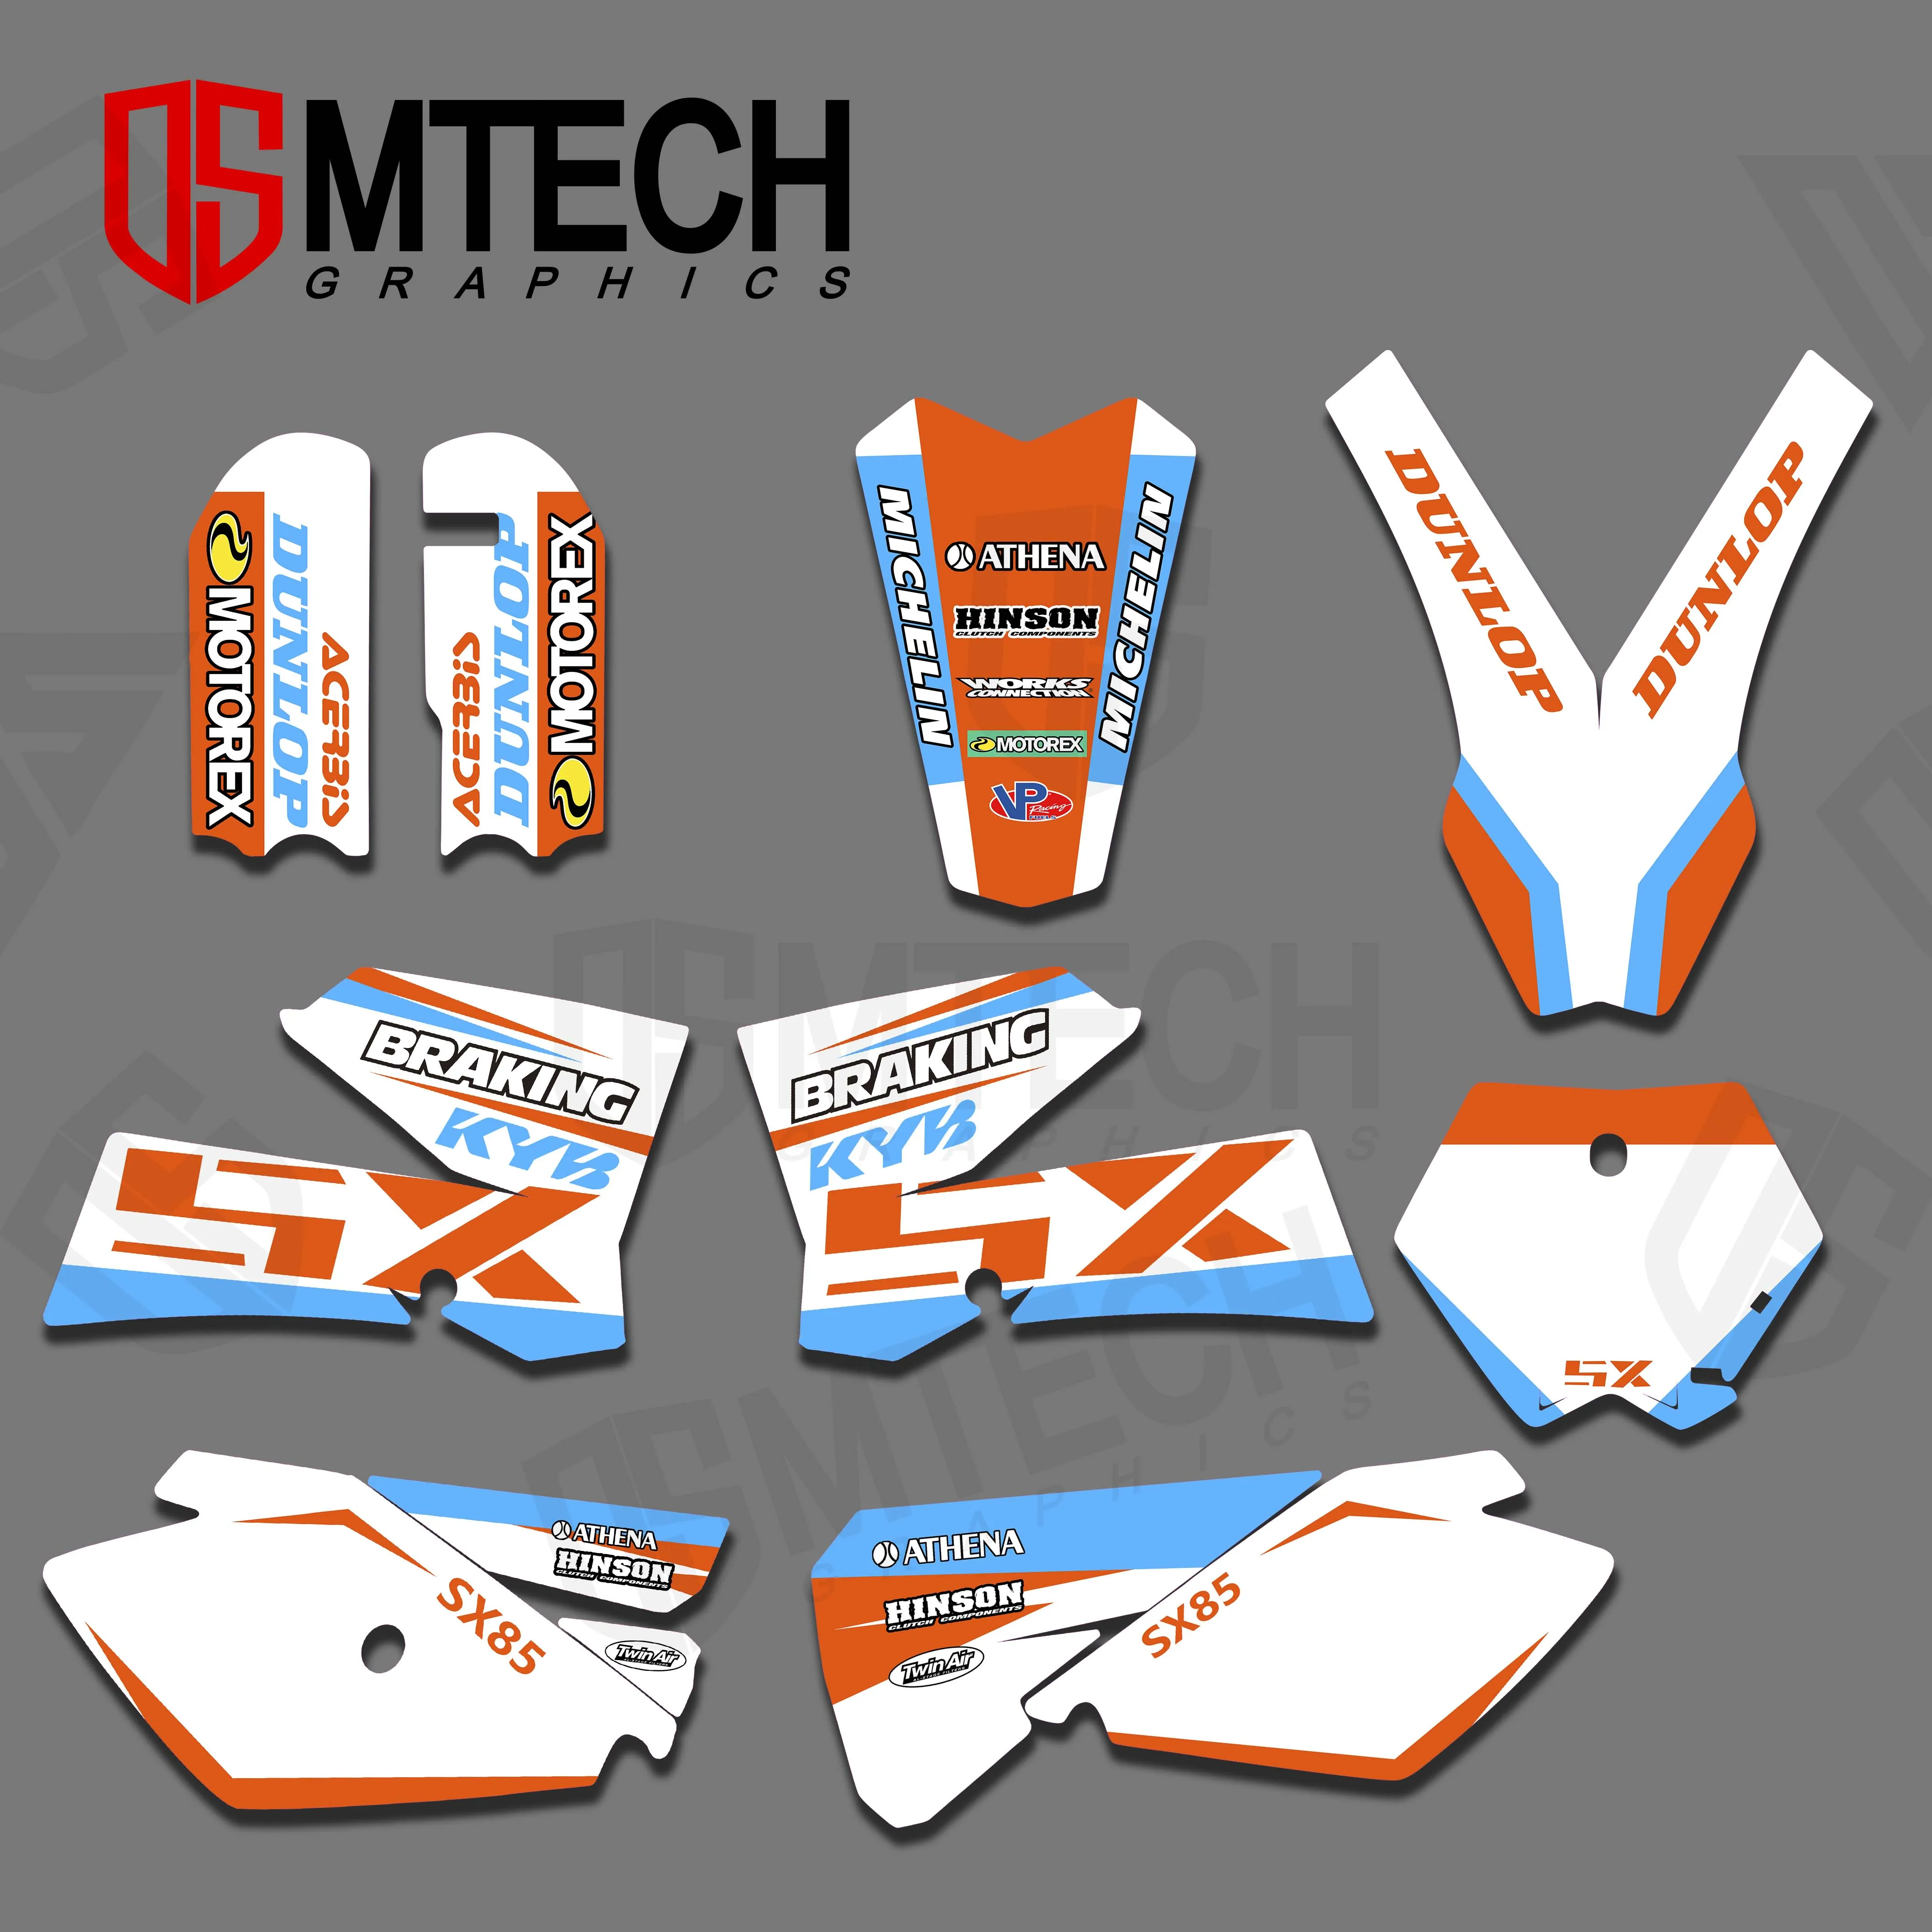 DSMTECH New TEAM GRAPHICS & BACKGROUNDS DECAL STICKER Set For KTM SX 85 SX85 85SX 03 -2007 2008 2009 2010 2011 2012 Personality